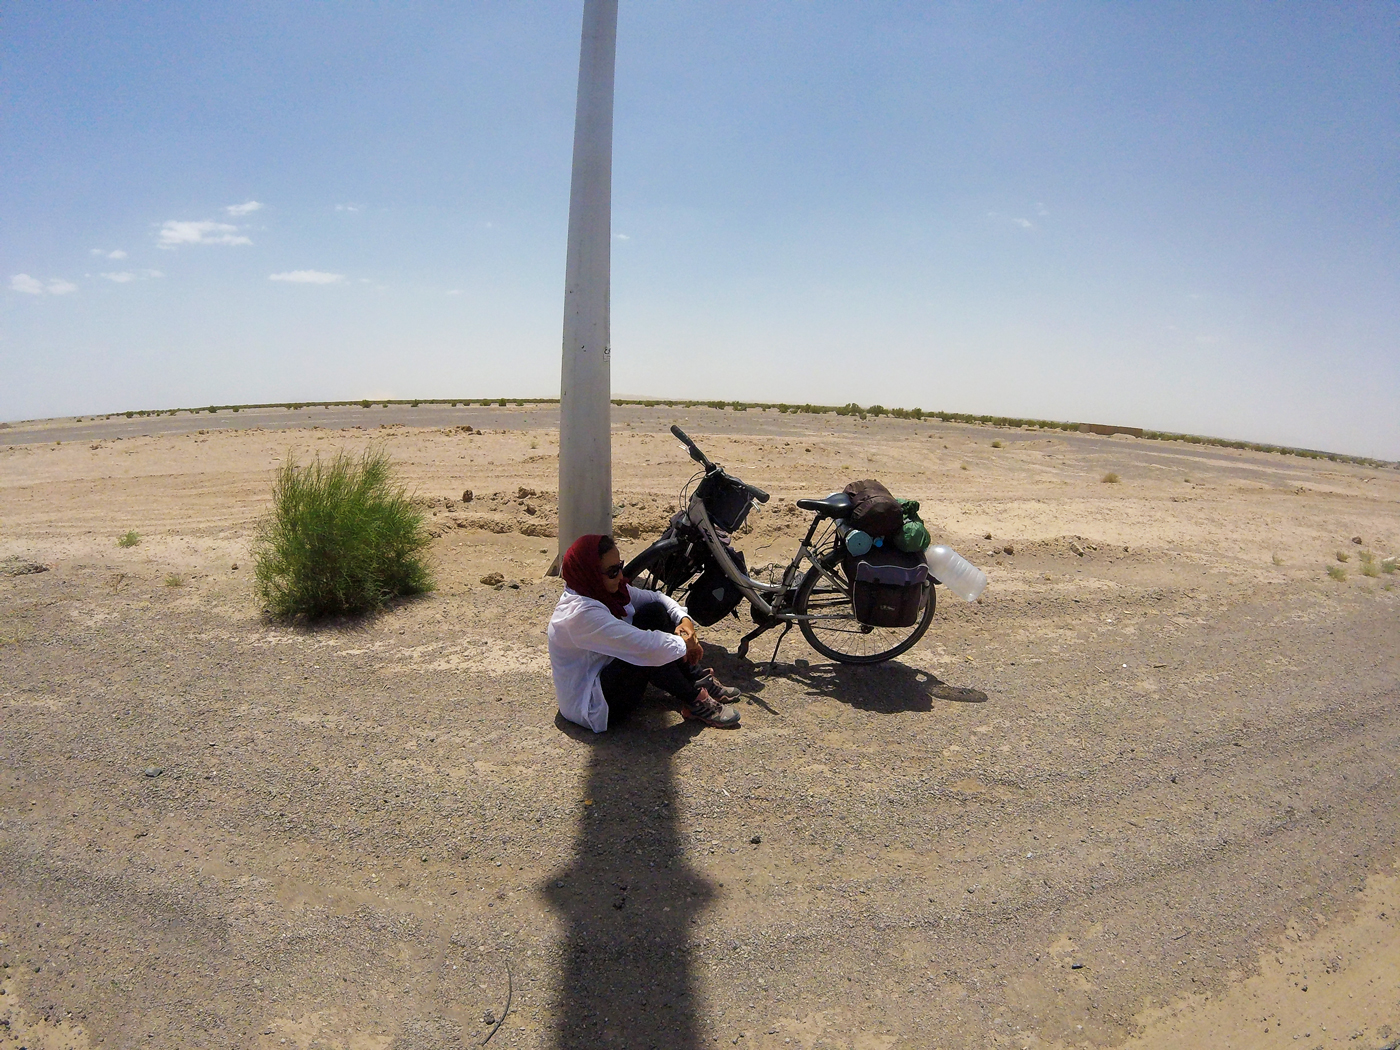 Bike trip, cross Iran by bike, deserted road to the exit of Varzaneh to hitchhike. Cycling travel, biketouring, cycling Iran, hitchhiking on a deserted road at the exit of Varzaneh.